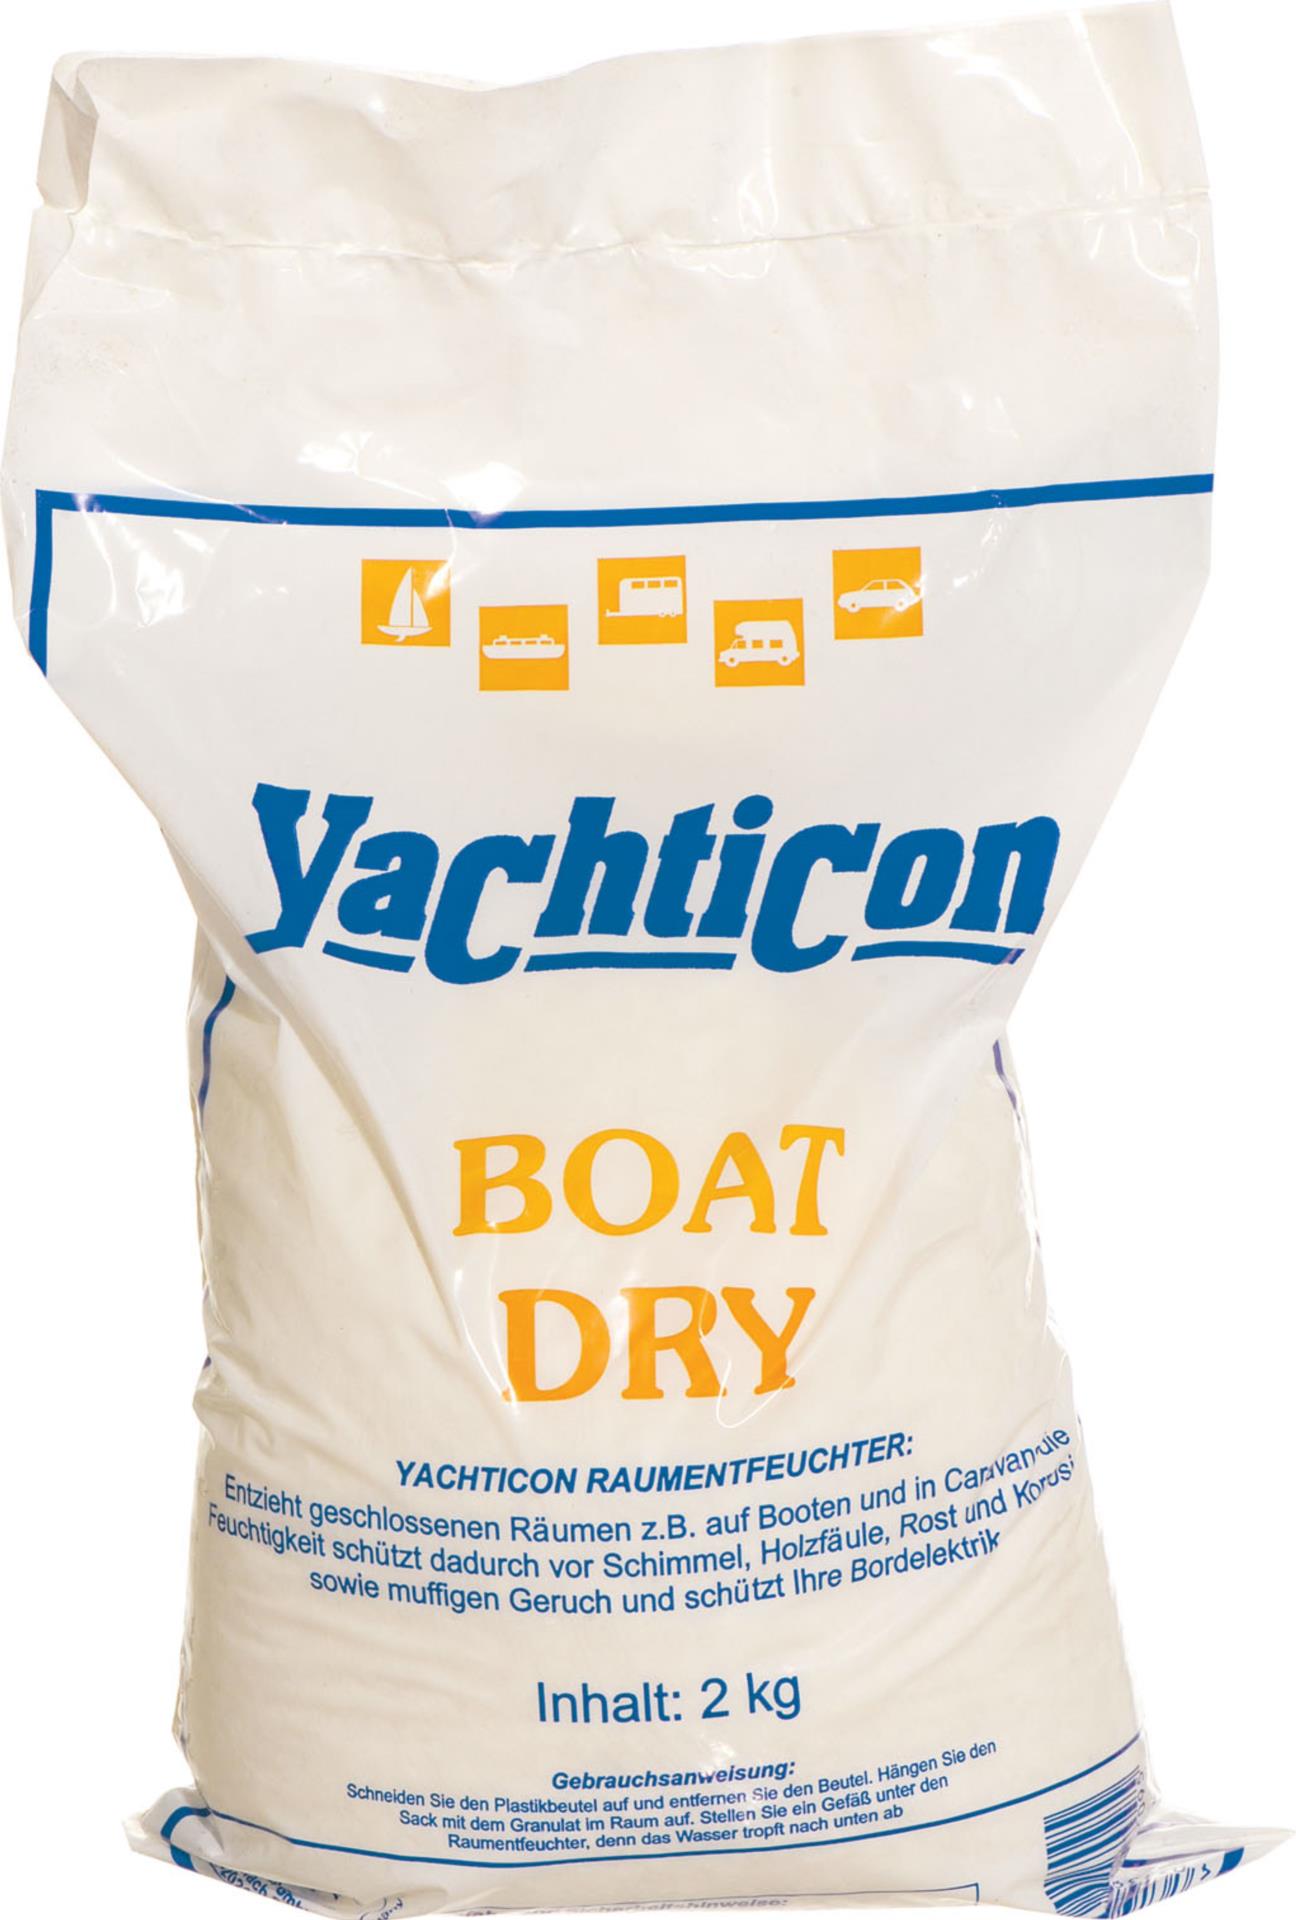 Yachticon Boat Dry, 2 kg